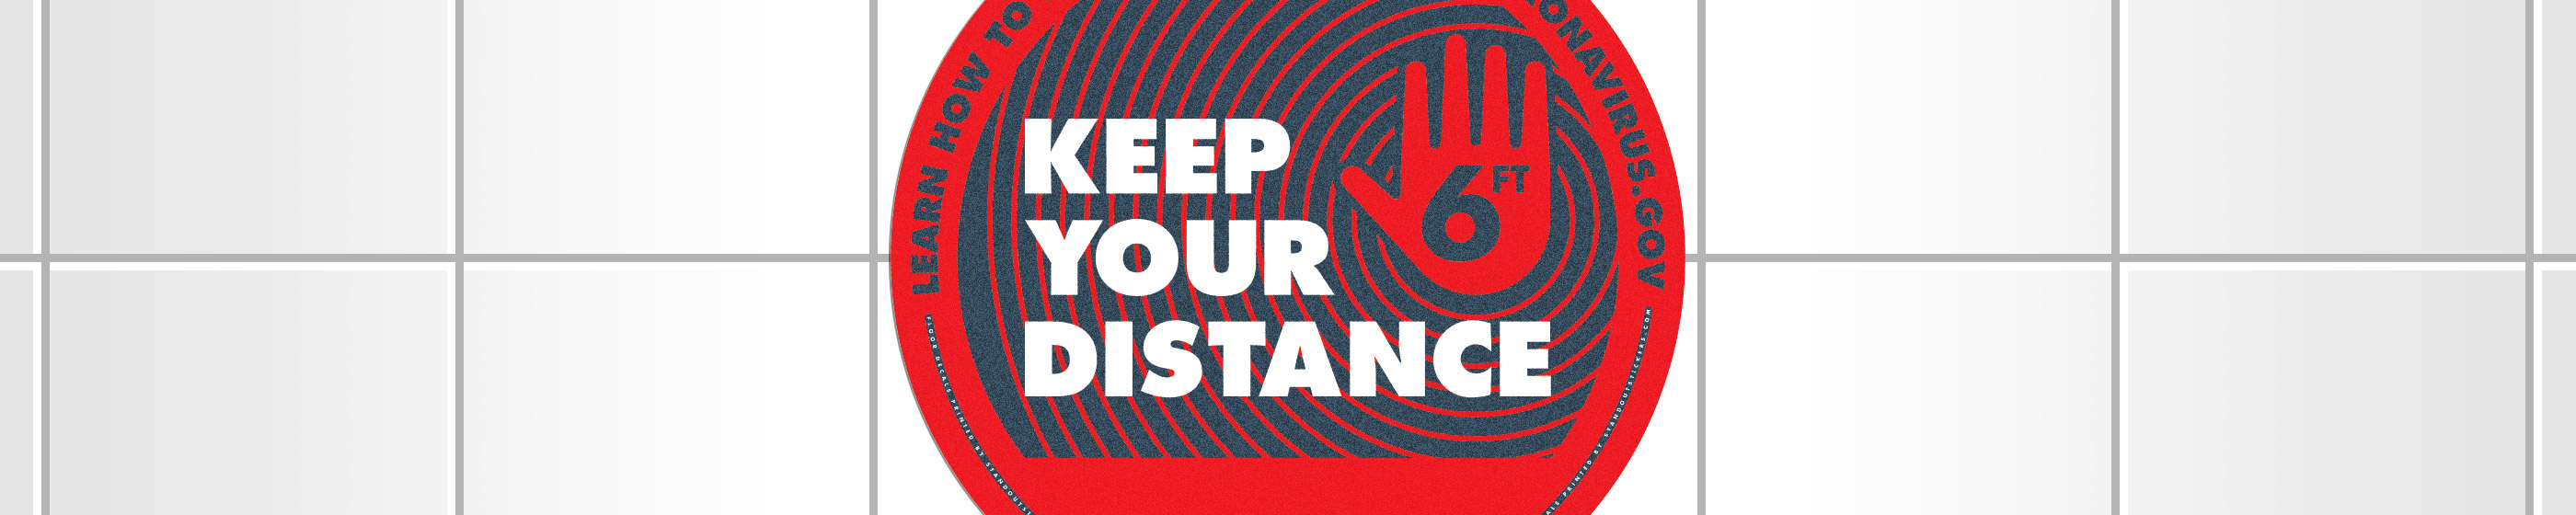 Keep Your Distance Floor Decal Cover Image